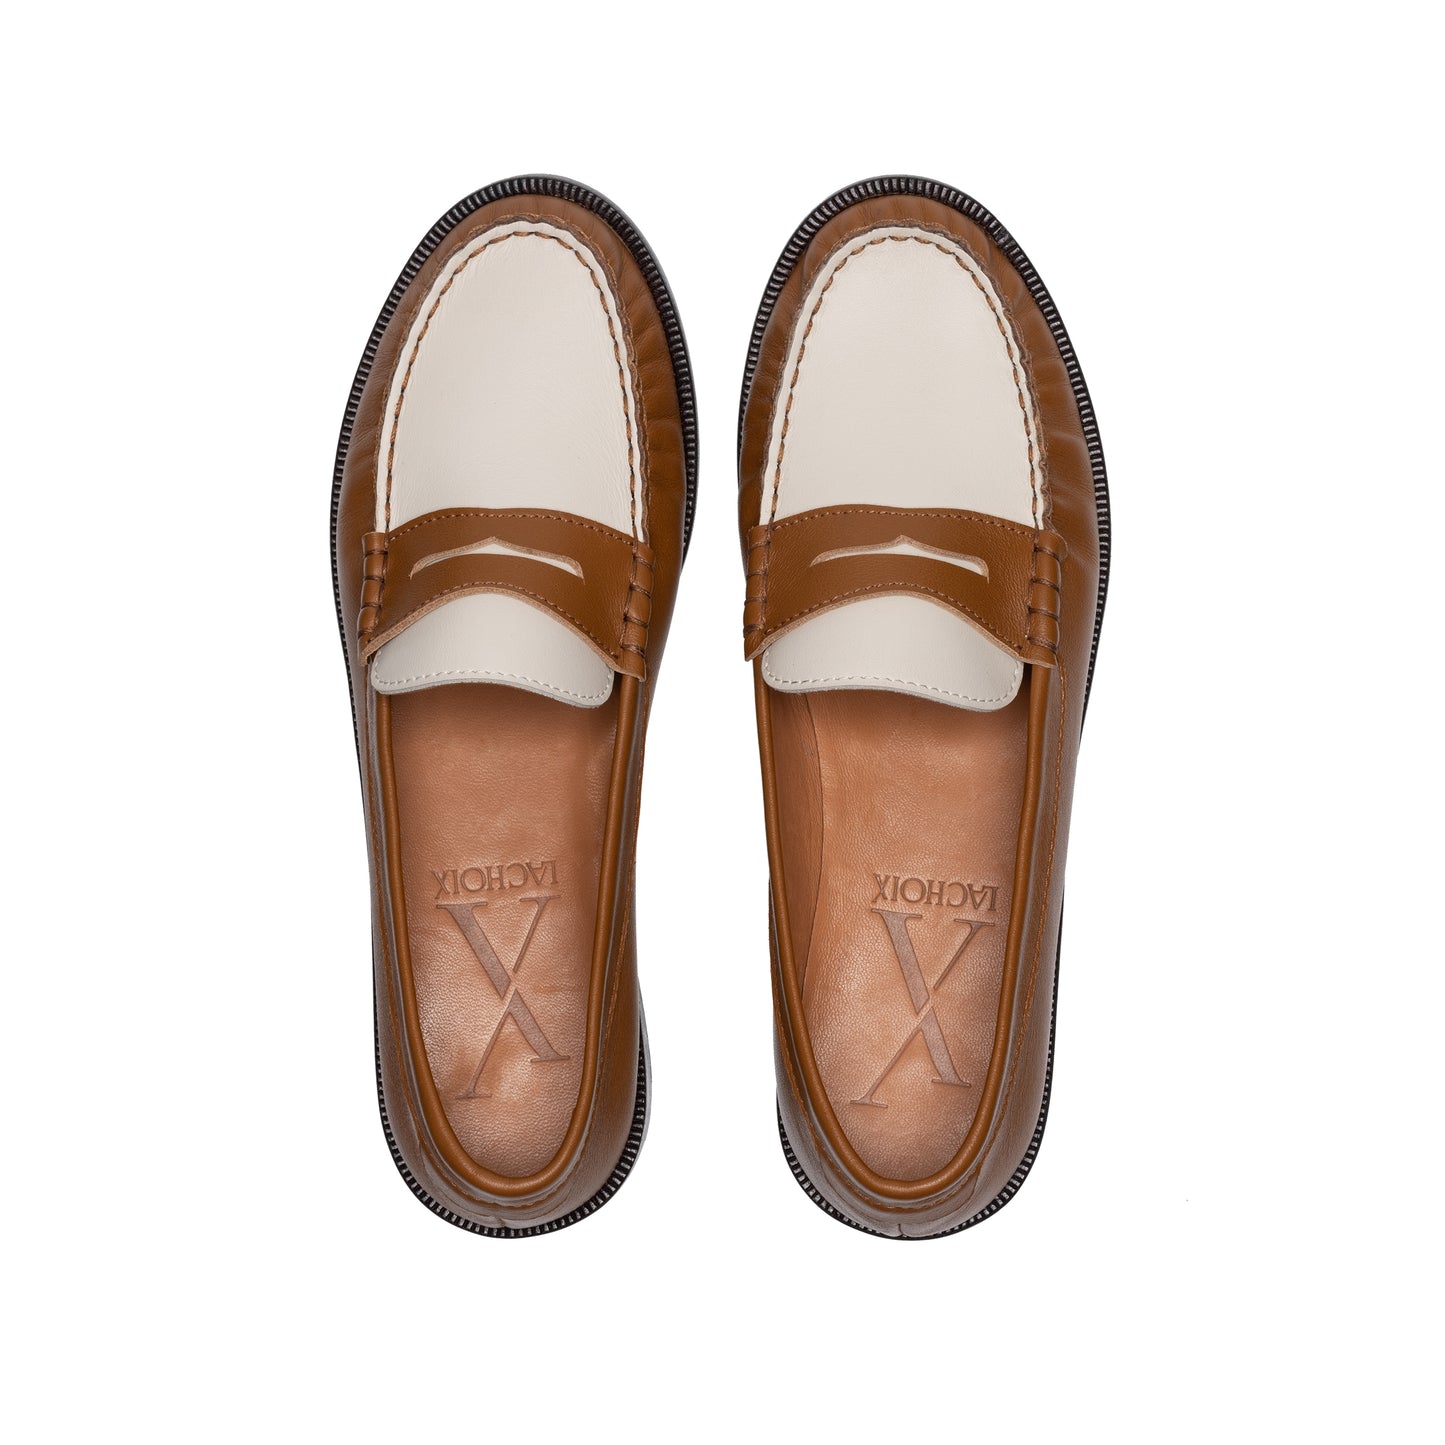 Penny Loafer in Camel & White